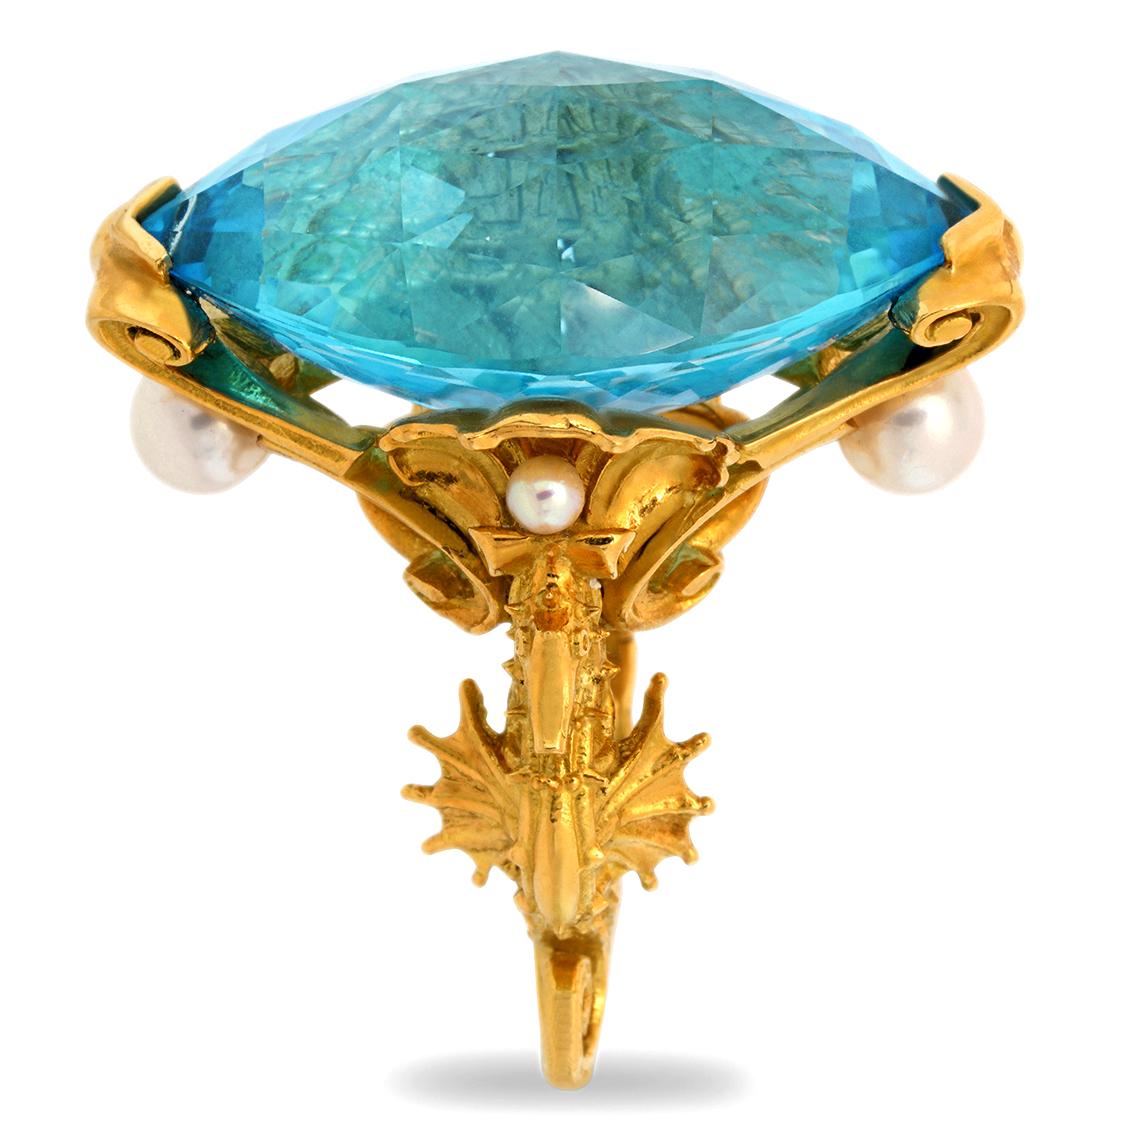 Handcrafted in 18kt yellow gold this captivating ring features a spectacular 52.3ct 31.14mm x 19.50mm x 14.06mm Swiss blue marquise checkerboard cut topaz buoyed upon golden seashells and flanked by two sentinel seahorses. It features four beautiful